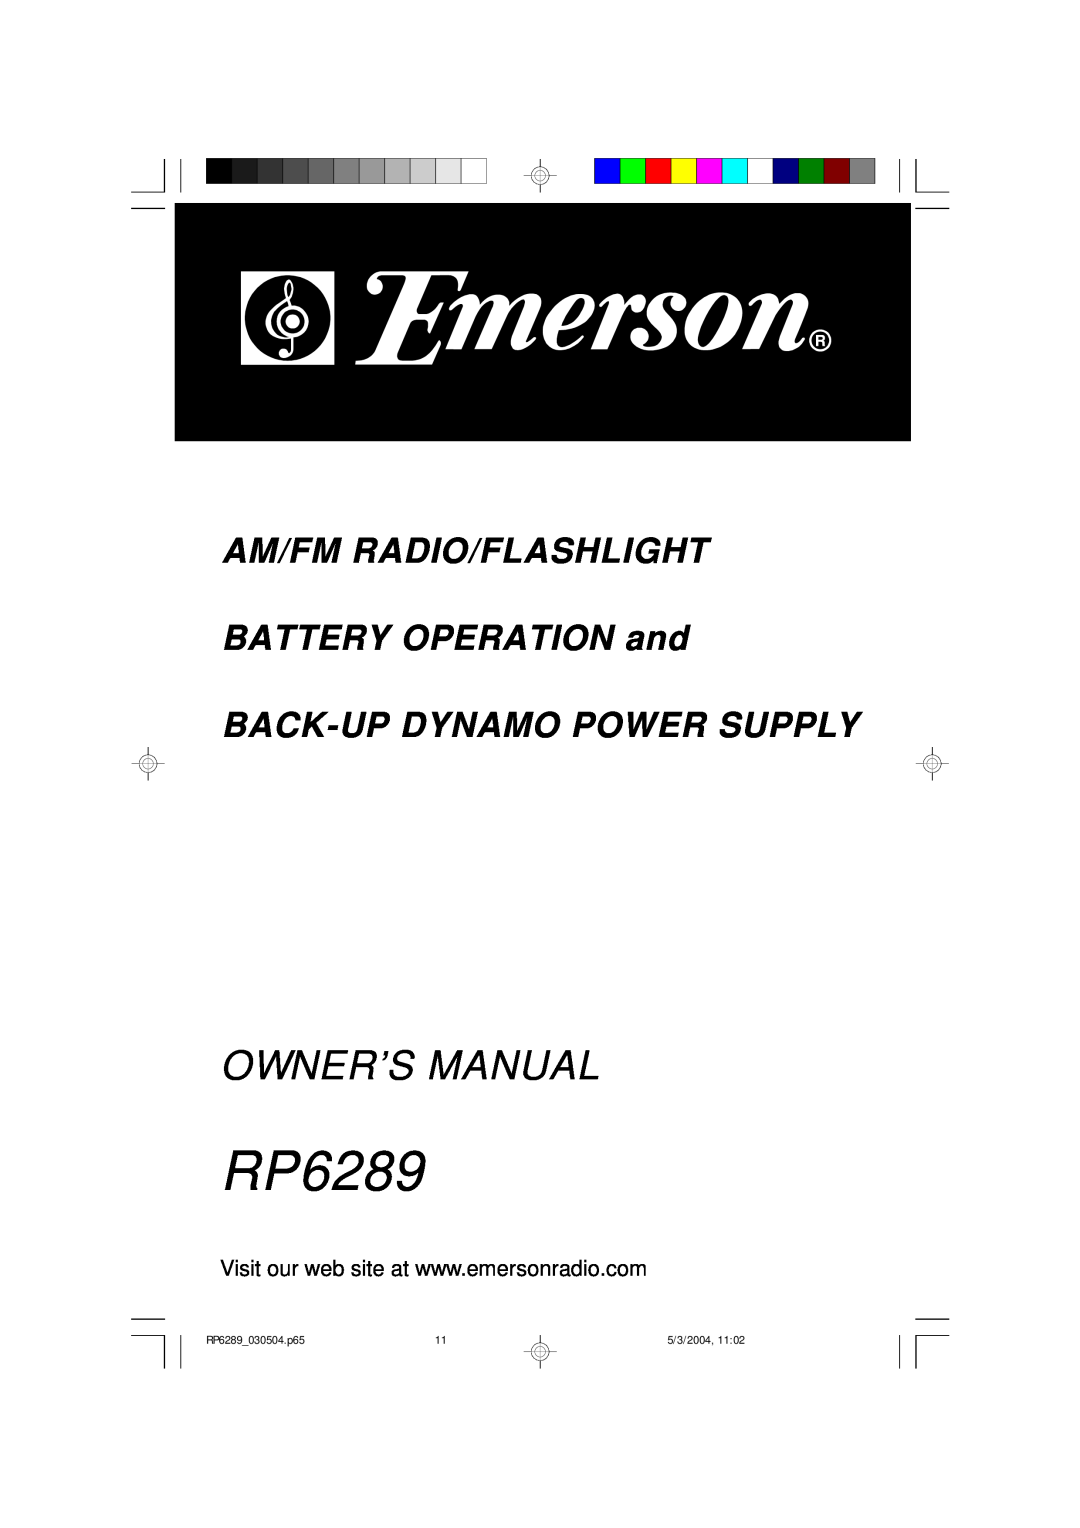 Emerson owner manual AM/FM RADIO/FLASHLIGHT BATTERY OPERATION and, Back-Updynamo Power Supply, RP6289 030504.p65 